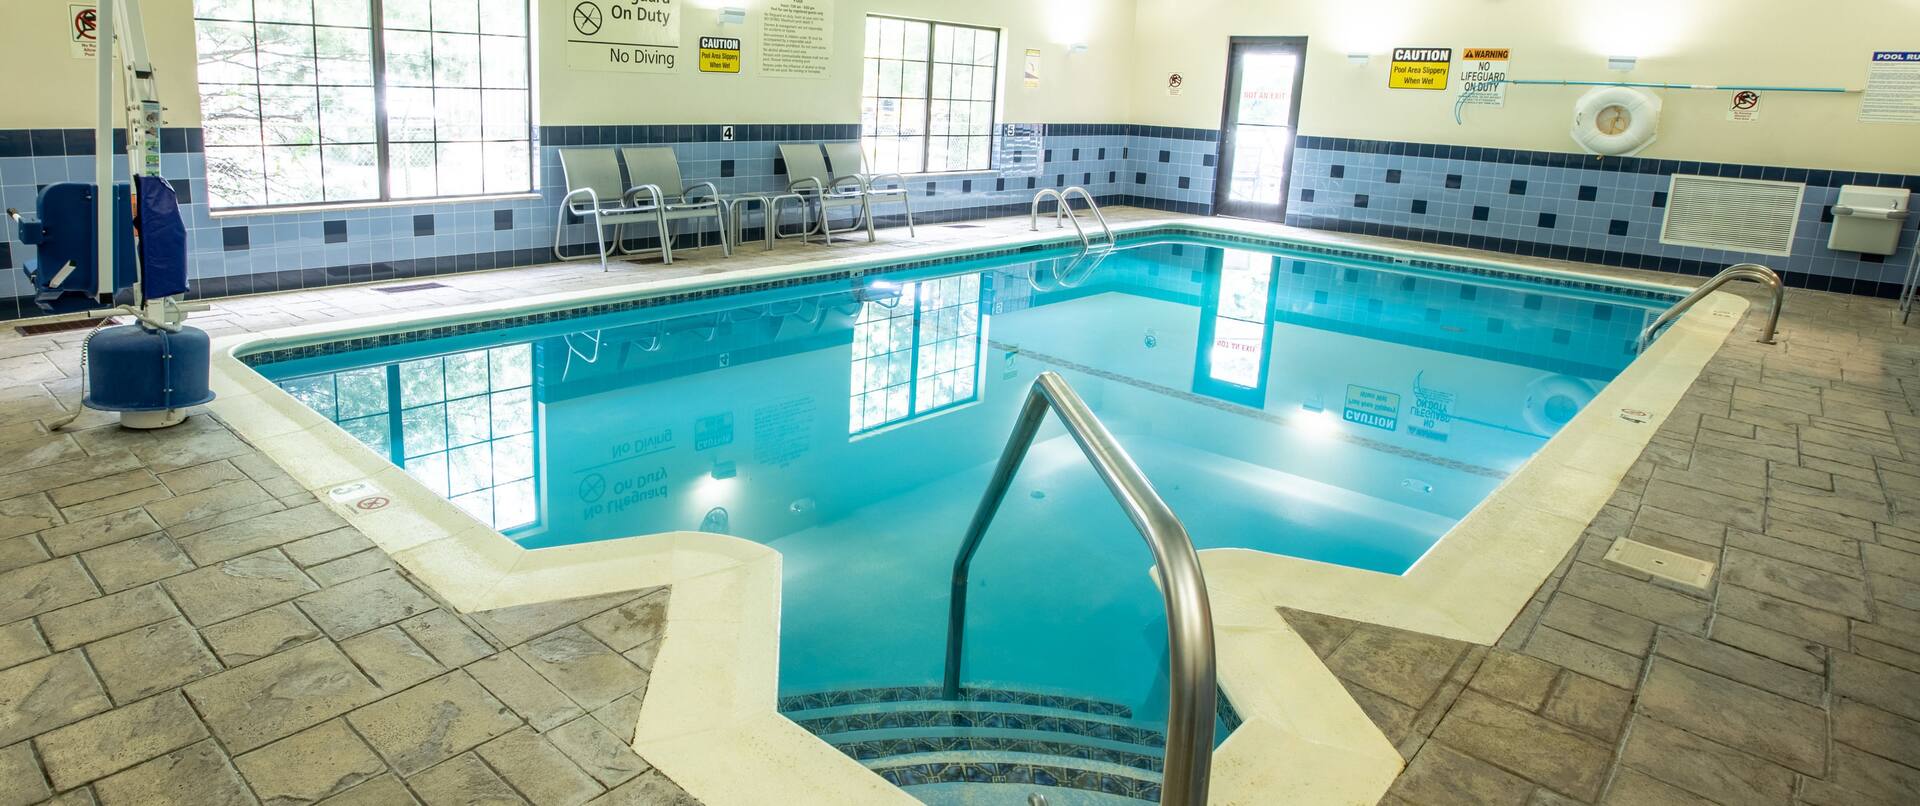 Indoor pool with entrance